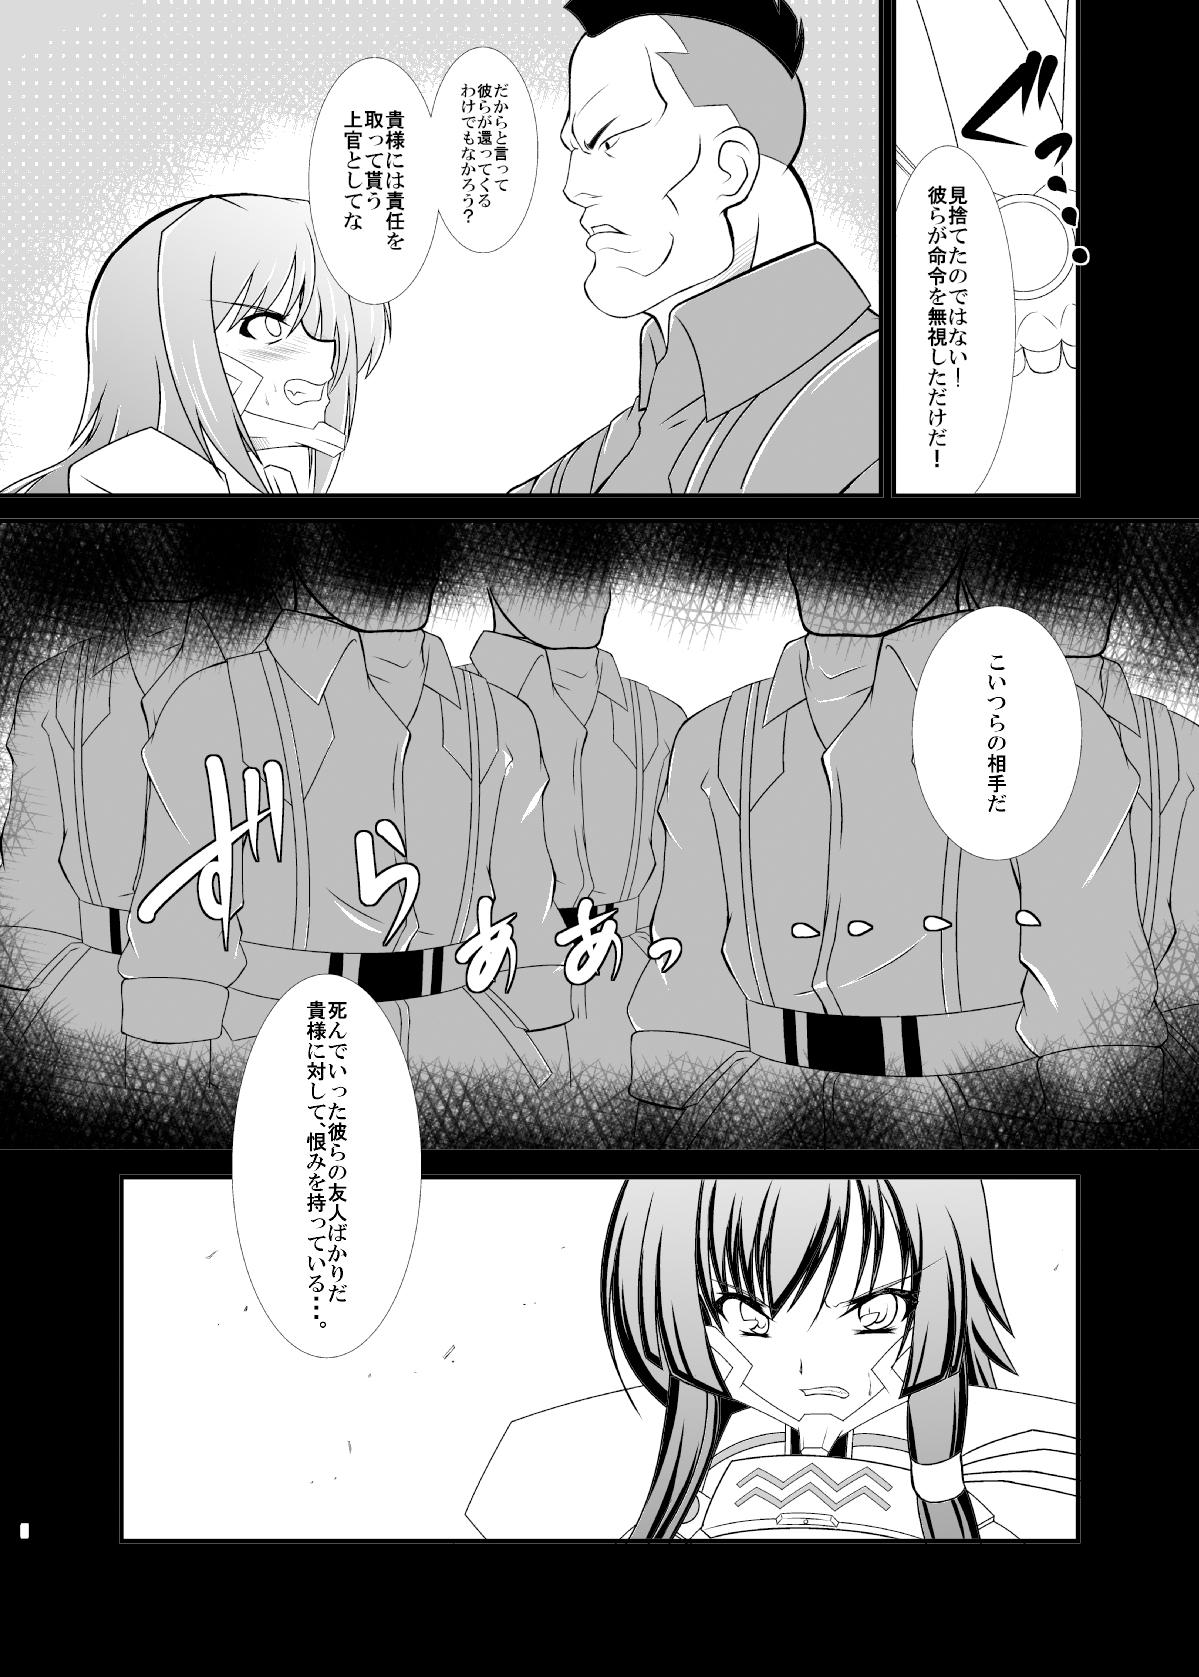 Interracial Sex KDT - Muv-luv alternative total eclipse Yoga - Page 6